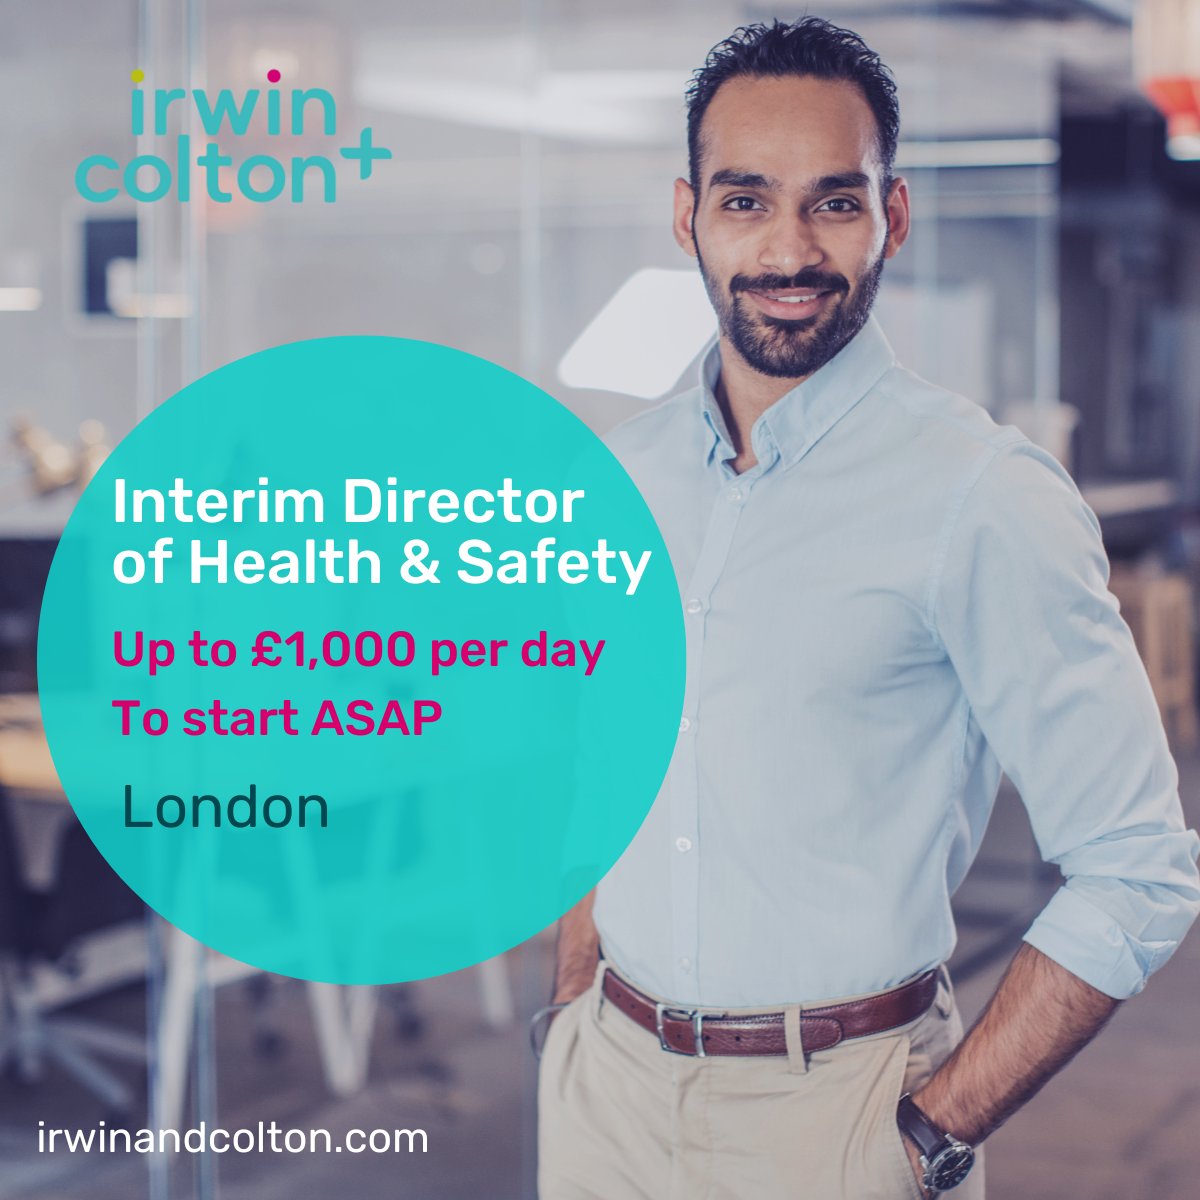 We are delighted to be partnering exclusively with a leading research and development organisation to find an Interim Health and Safety Director. Find out more here: irwinandcolton.com/job/interim-di… #safetyjob #safetycontractor